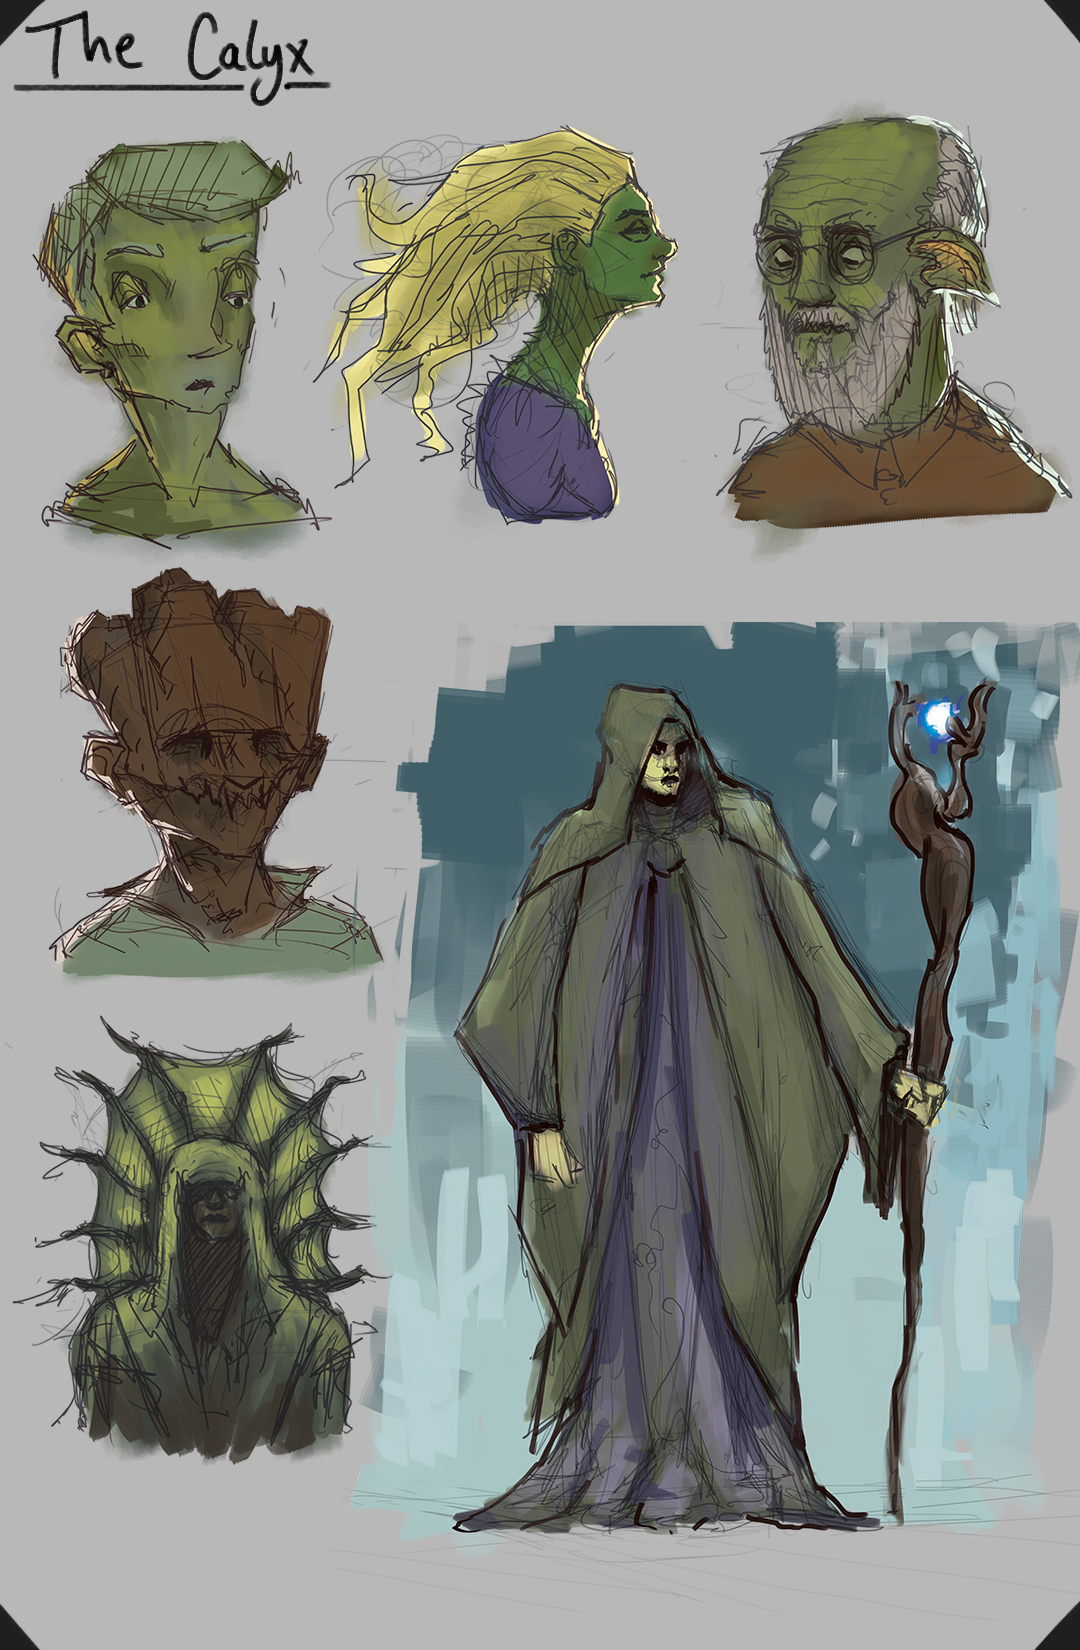 Selection of sketches showing ‘the Calyx’ (plant based humanoids) from the Lost Eons world